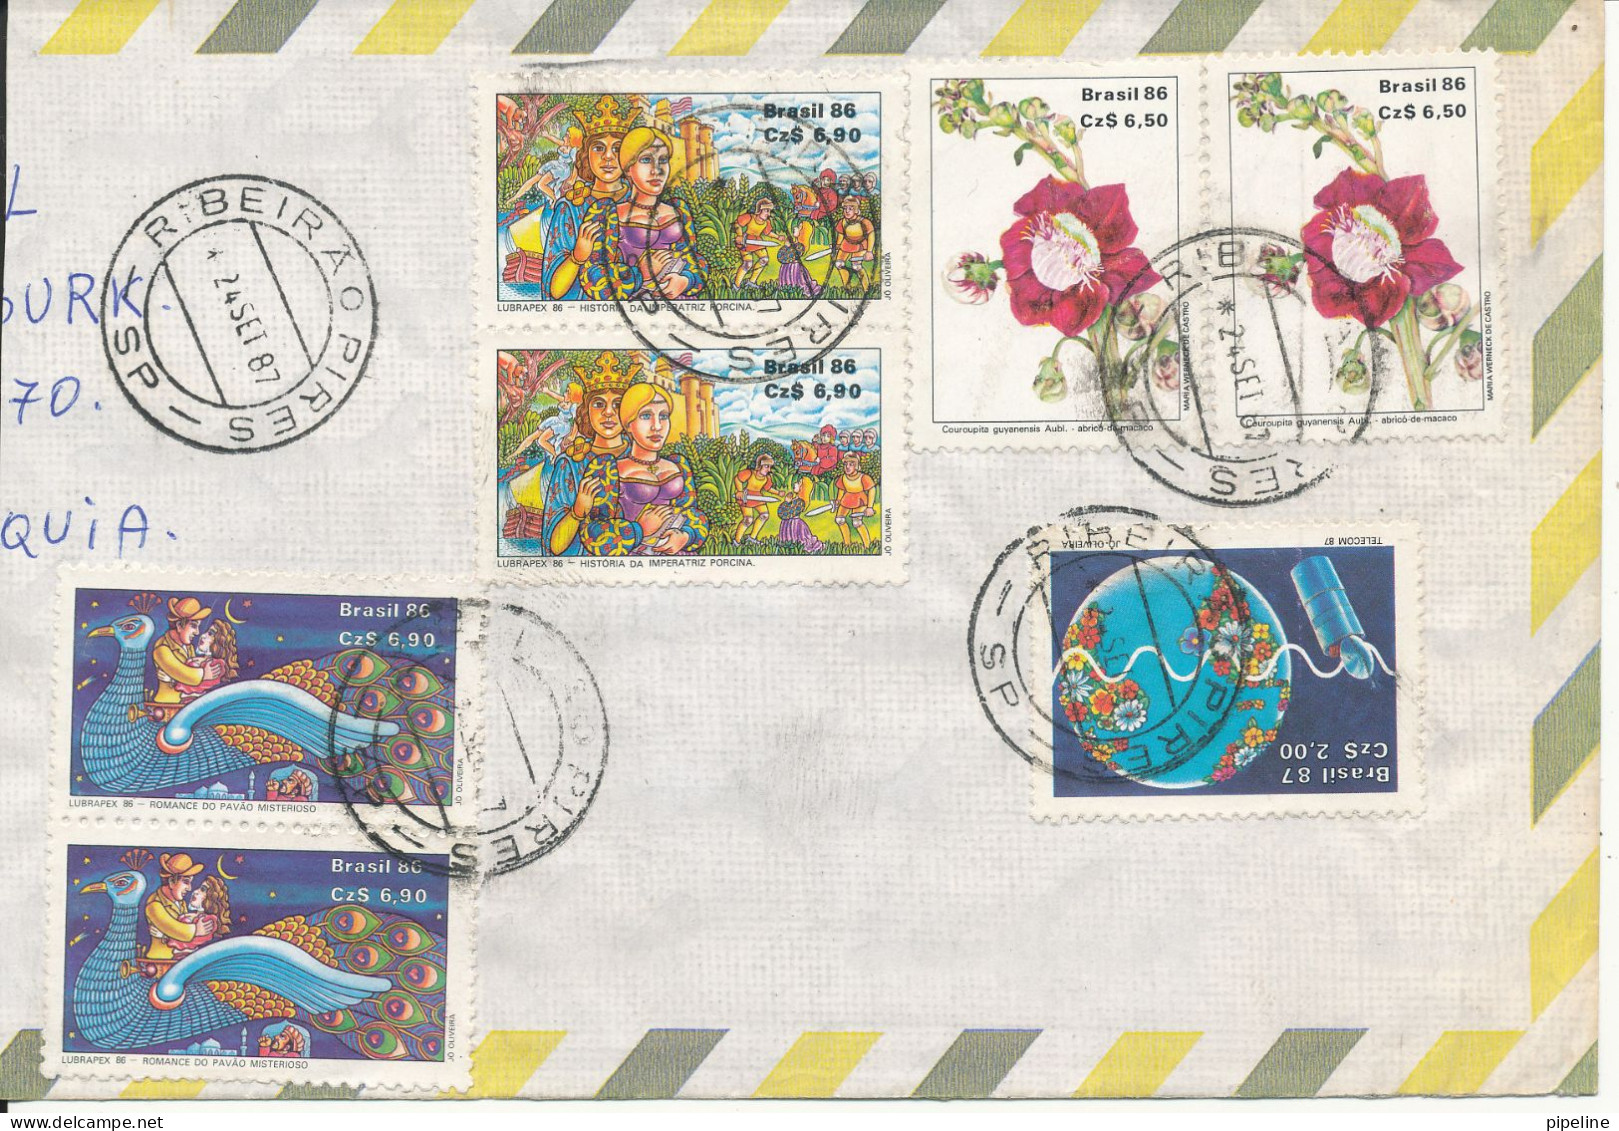 Brazil Air Mail Cover Sent To Czechoslovakia 24-9-1987 With A Lot Of Stamps (the Cover Is Cut In The Left Side) - Airmail